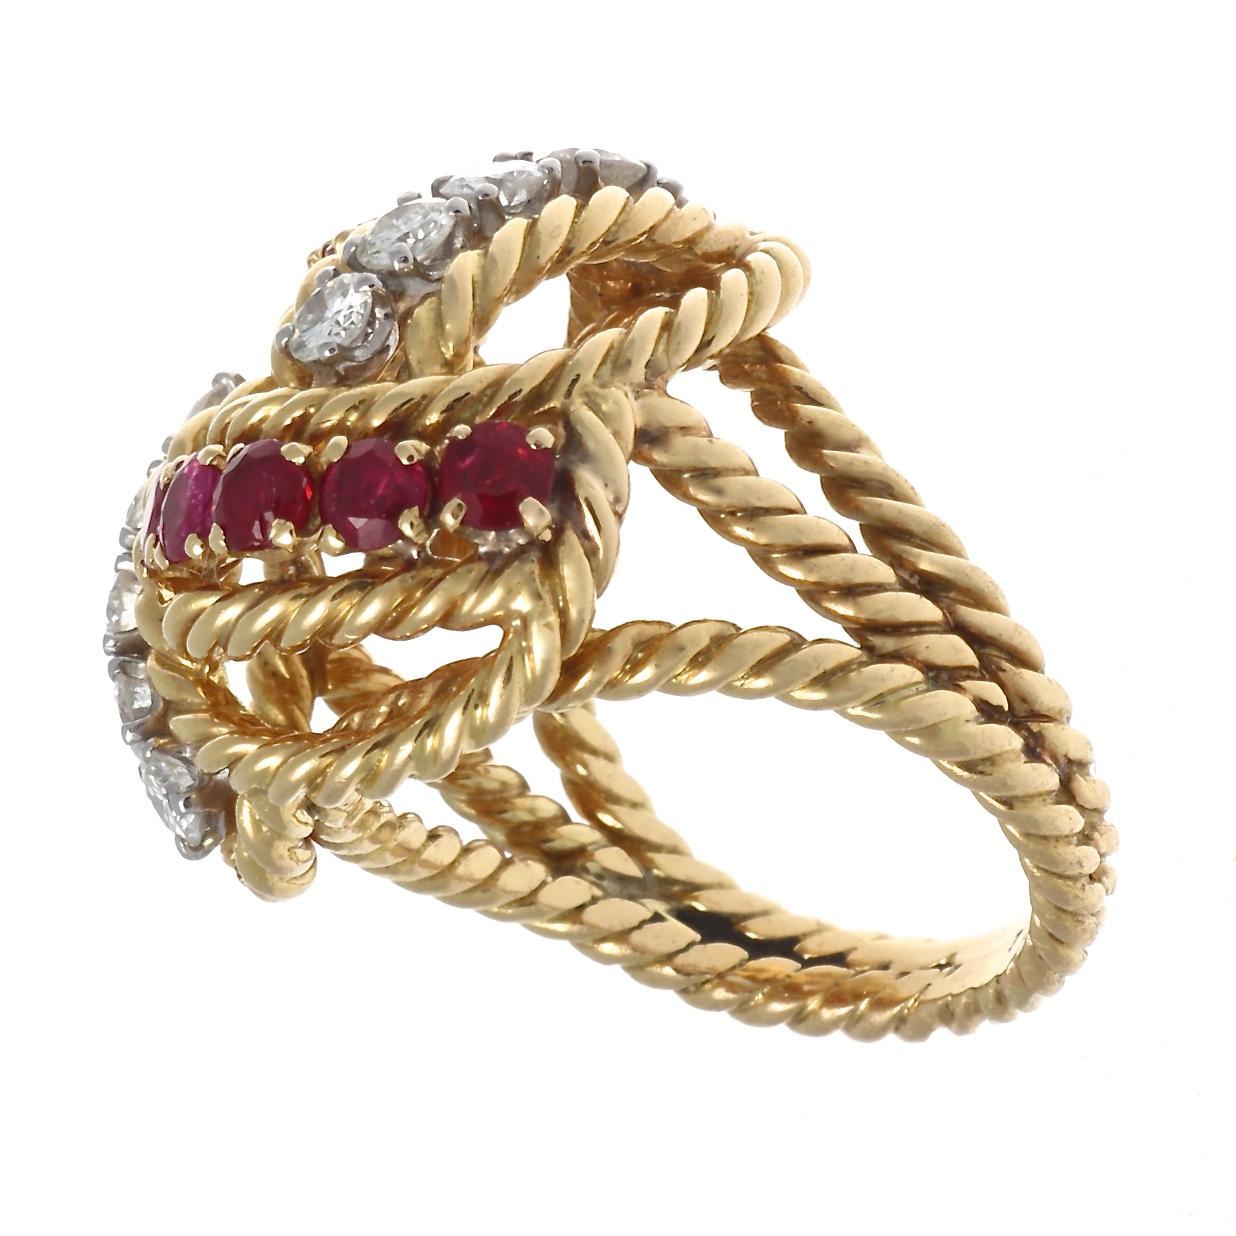 Famous throughout the world for its bold, free style, Boucheron has remained in the top tier of jewelry houses by offering ever more creative jewelry. Featuring a swirl of diamonds and rubies set between waves of 18k rope motif yellow gold. Signed